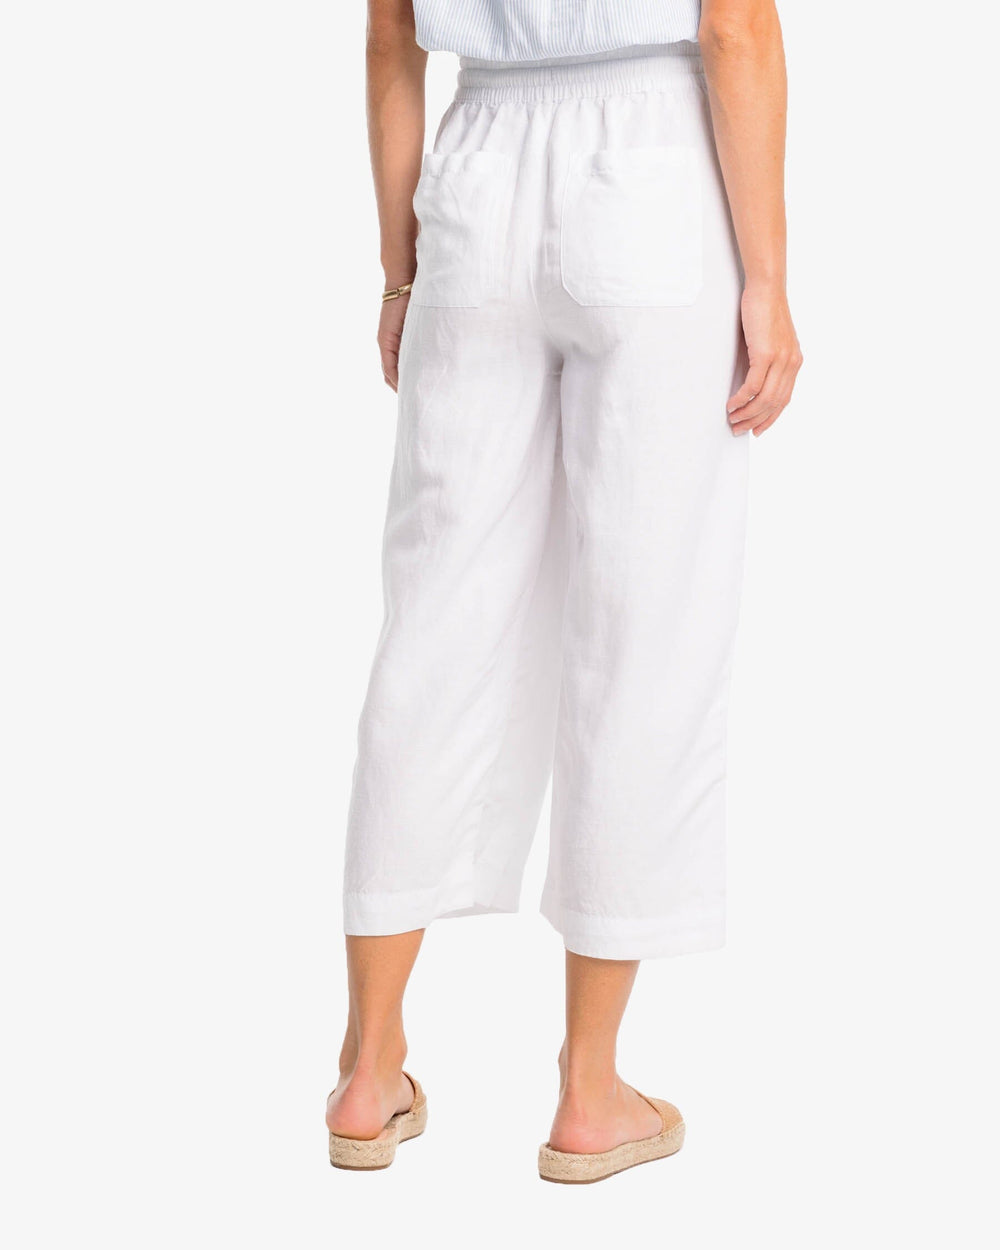 The back view of the Southern Tide Malisa Wide Leg Crop Pant by Southern Tide - Classic White